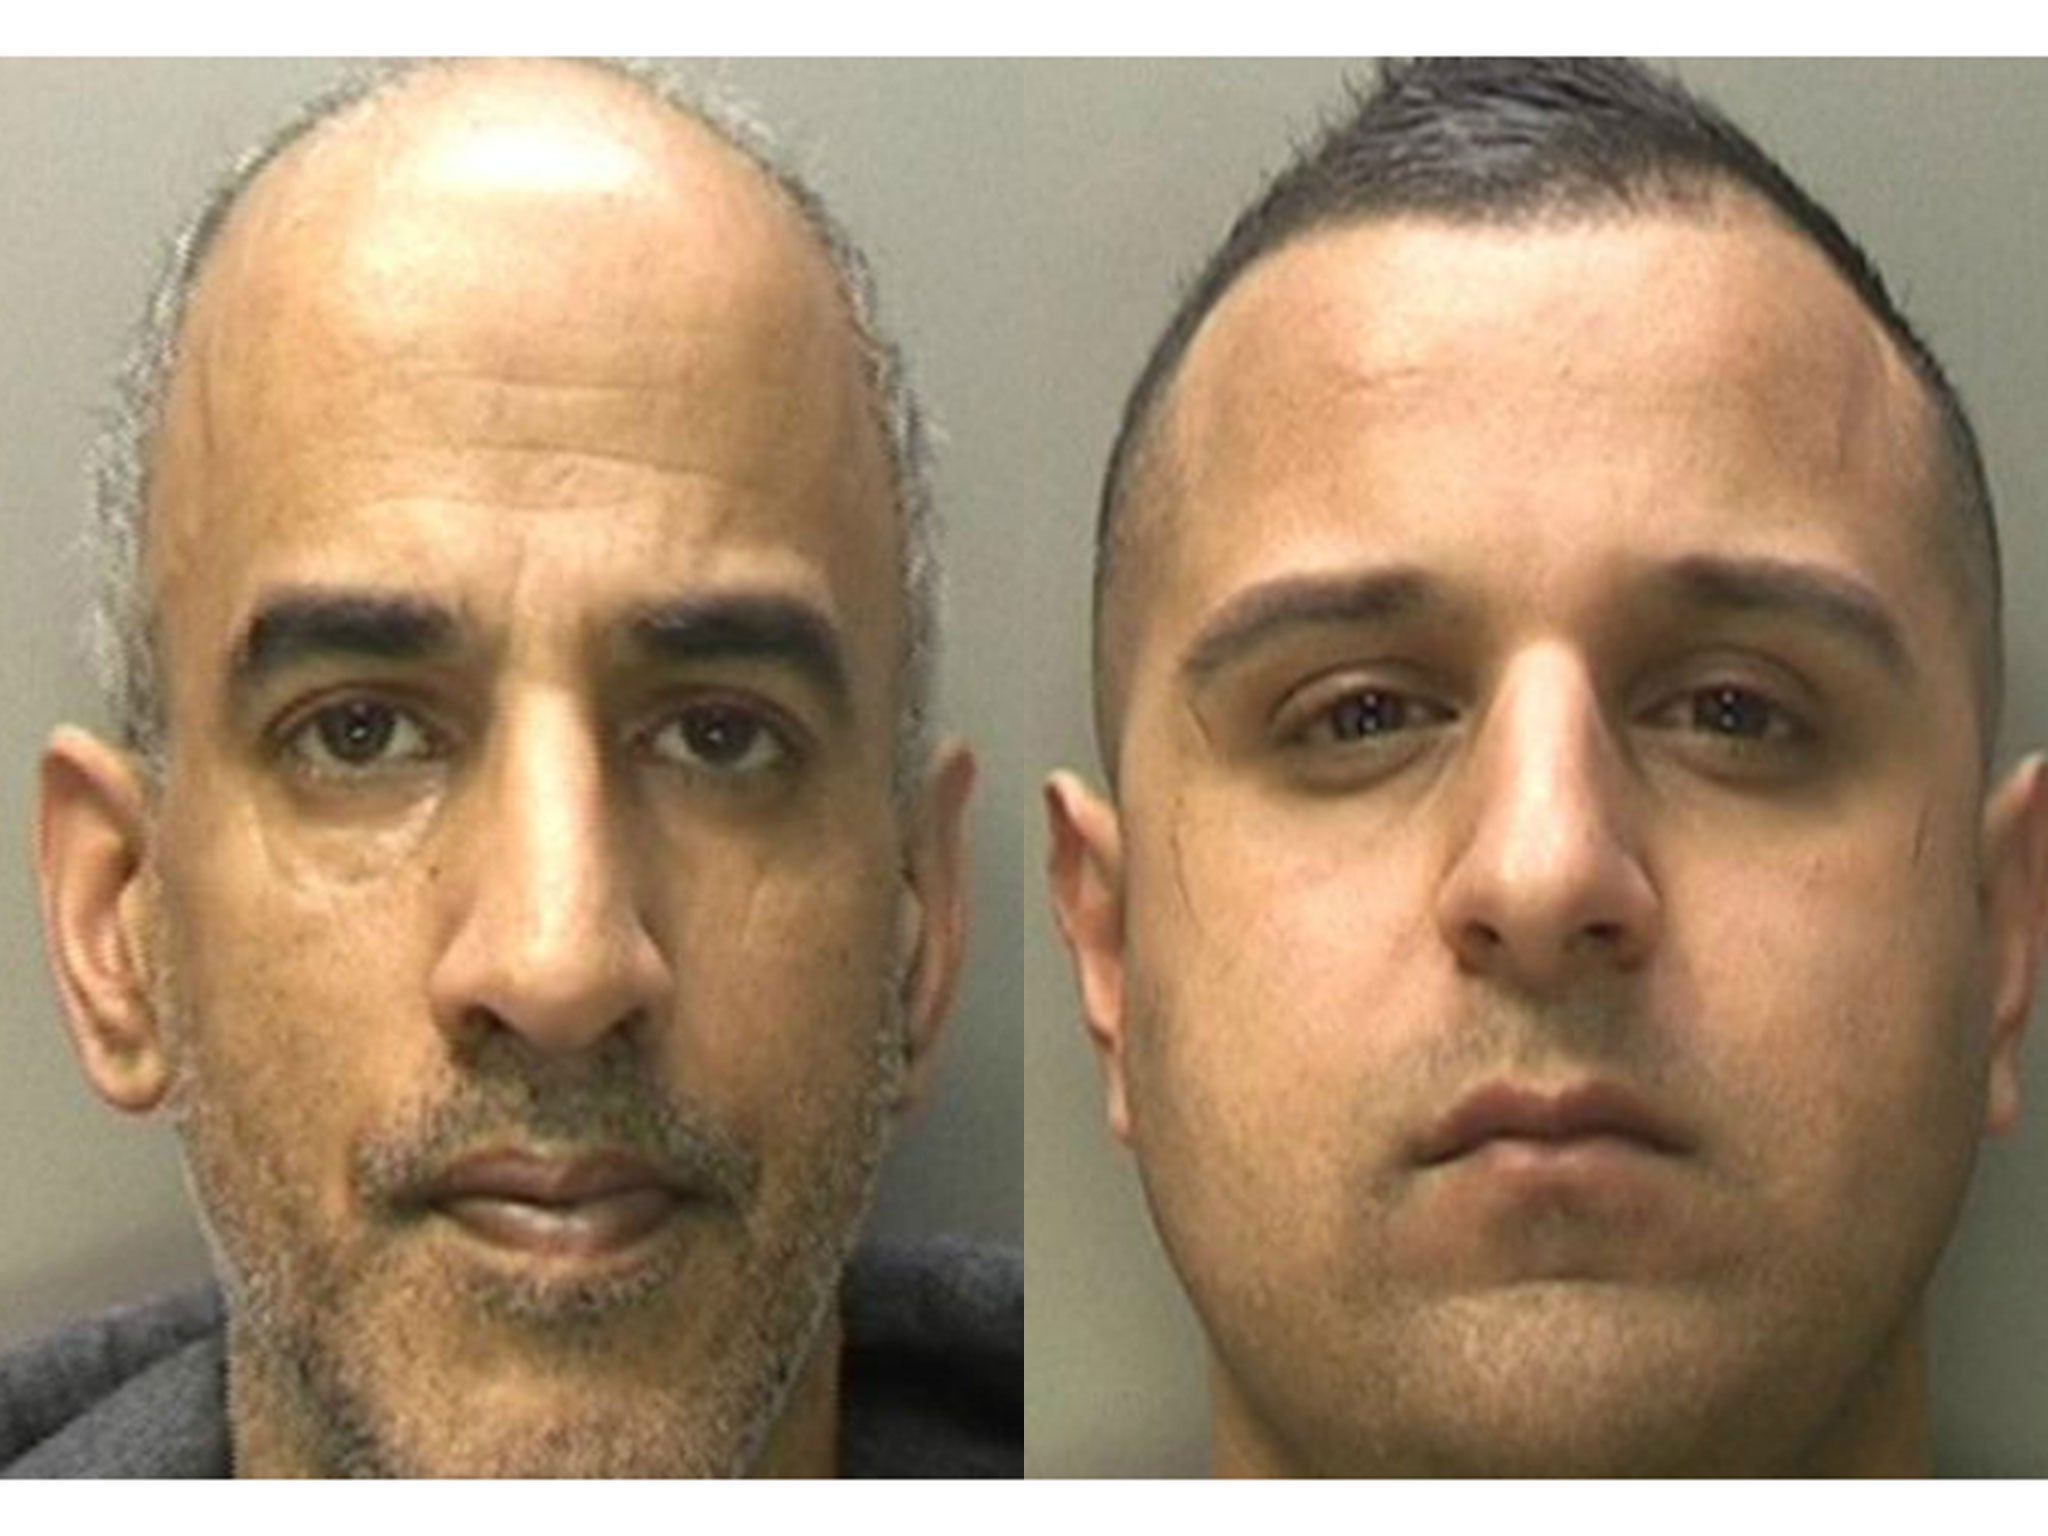 Wahid Husman and Tahsib Majid used their jobs as West Midlands Police officers to plot to steal drugs